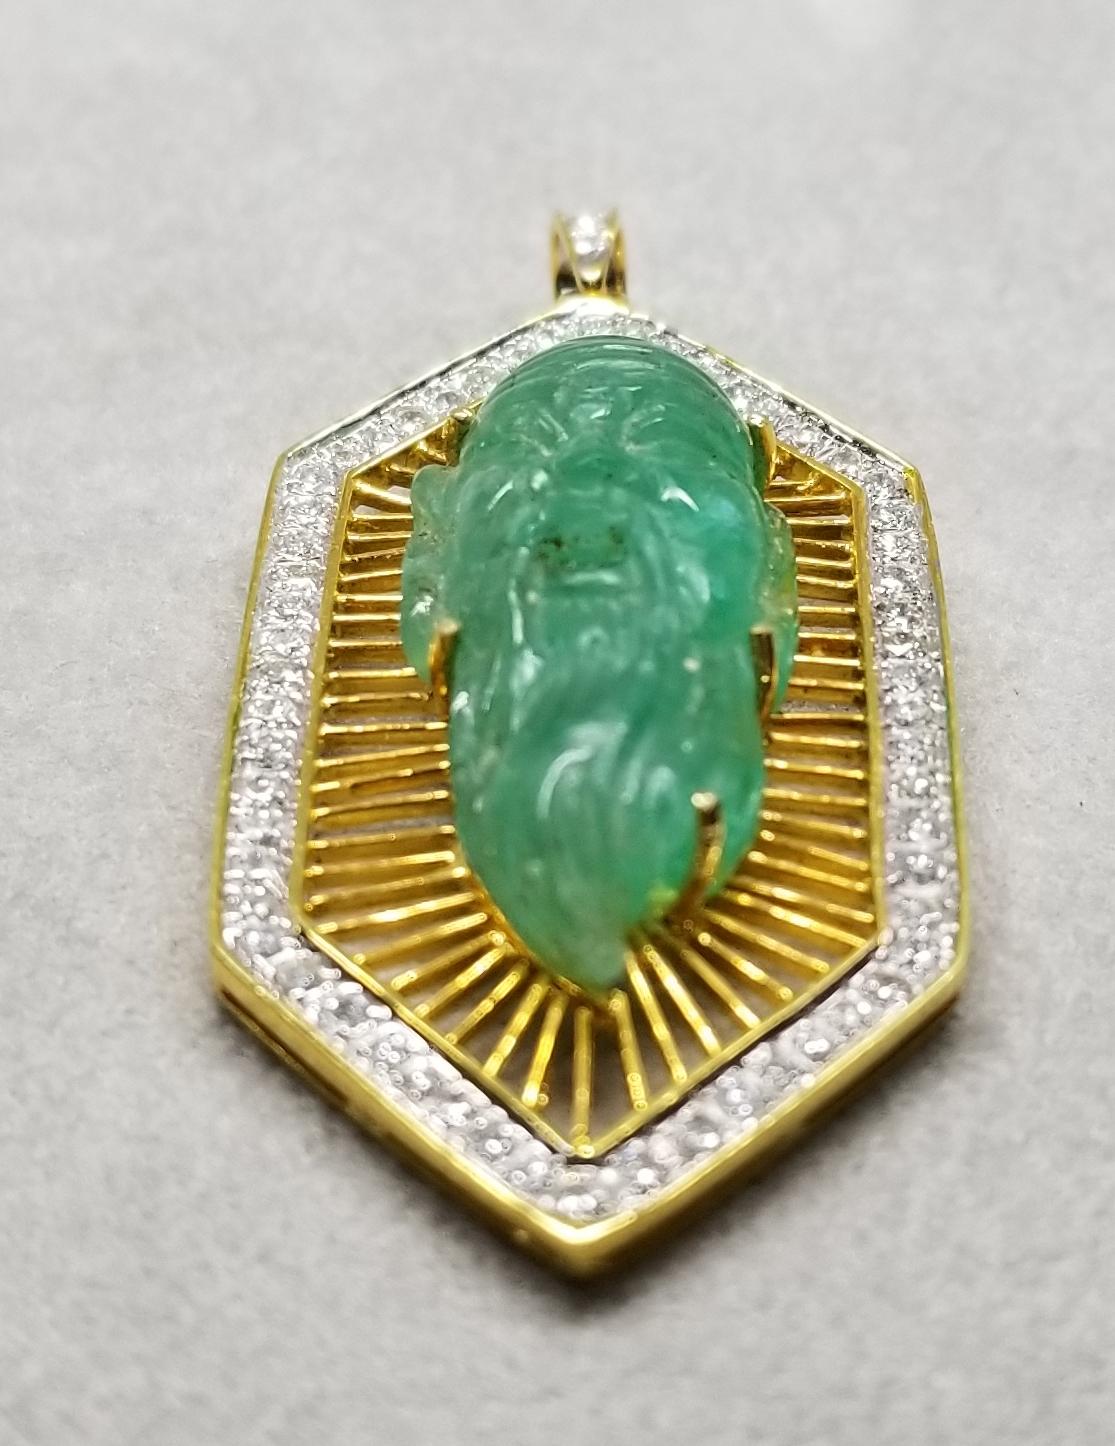 This piece of fine jewelry was designed and hand crafted by “Moshi” of New York, it was found in a vault from an estate sale and was never used.  18k yellow gold emerald and diamond pendant containing 1 hand carved emerald of an old bearded man